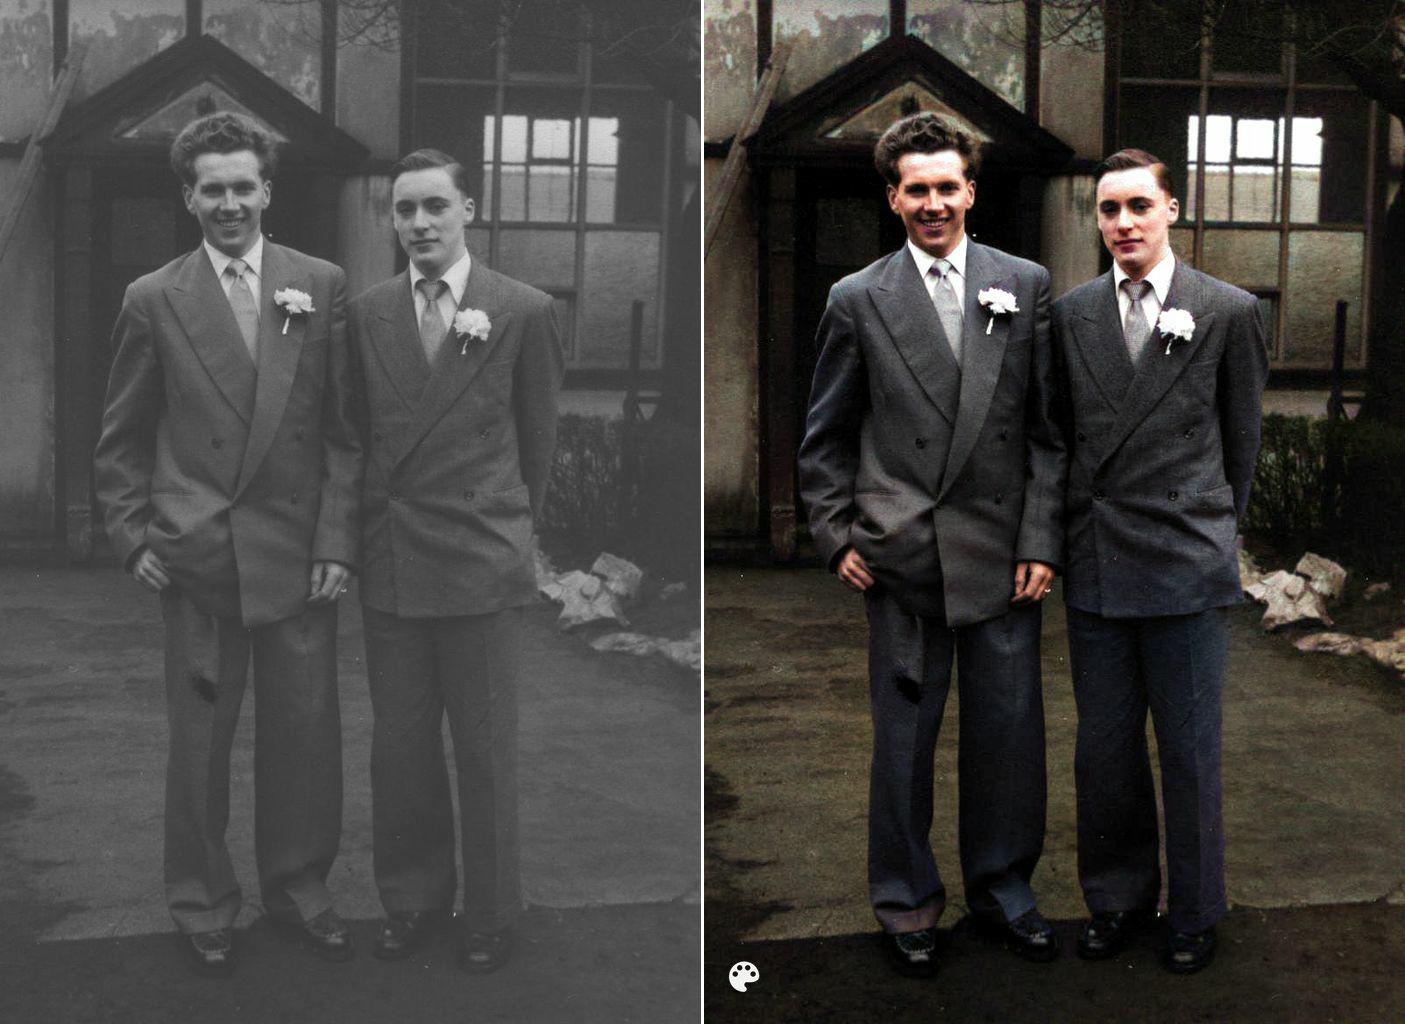 Terry’s father James William Reynolds IV and his brother Donald at his wedding